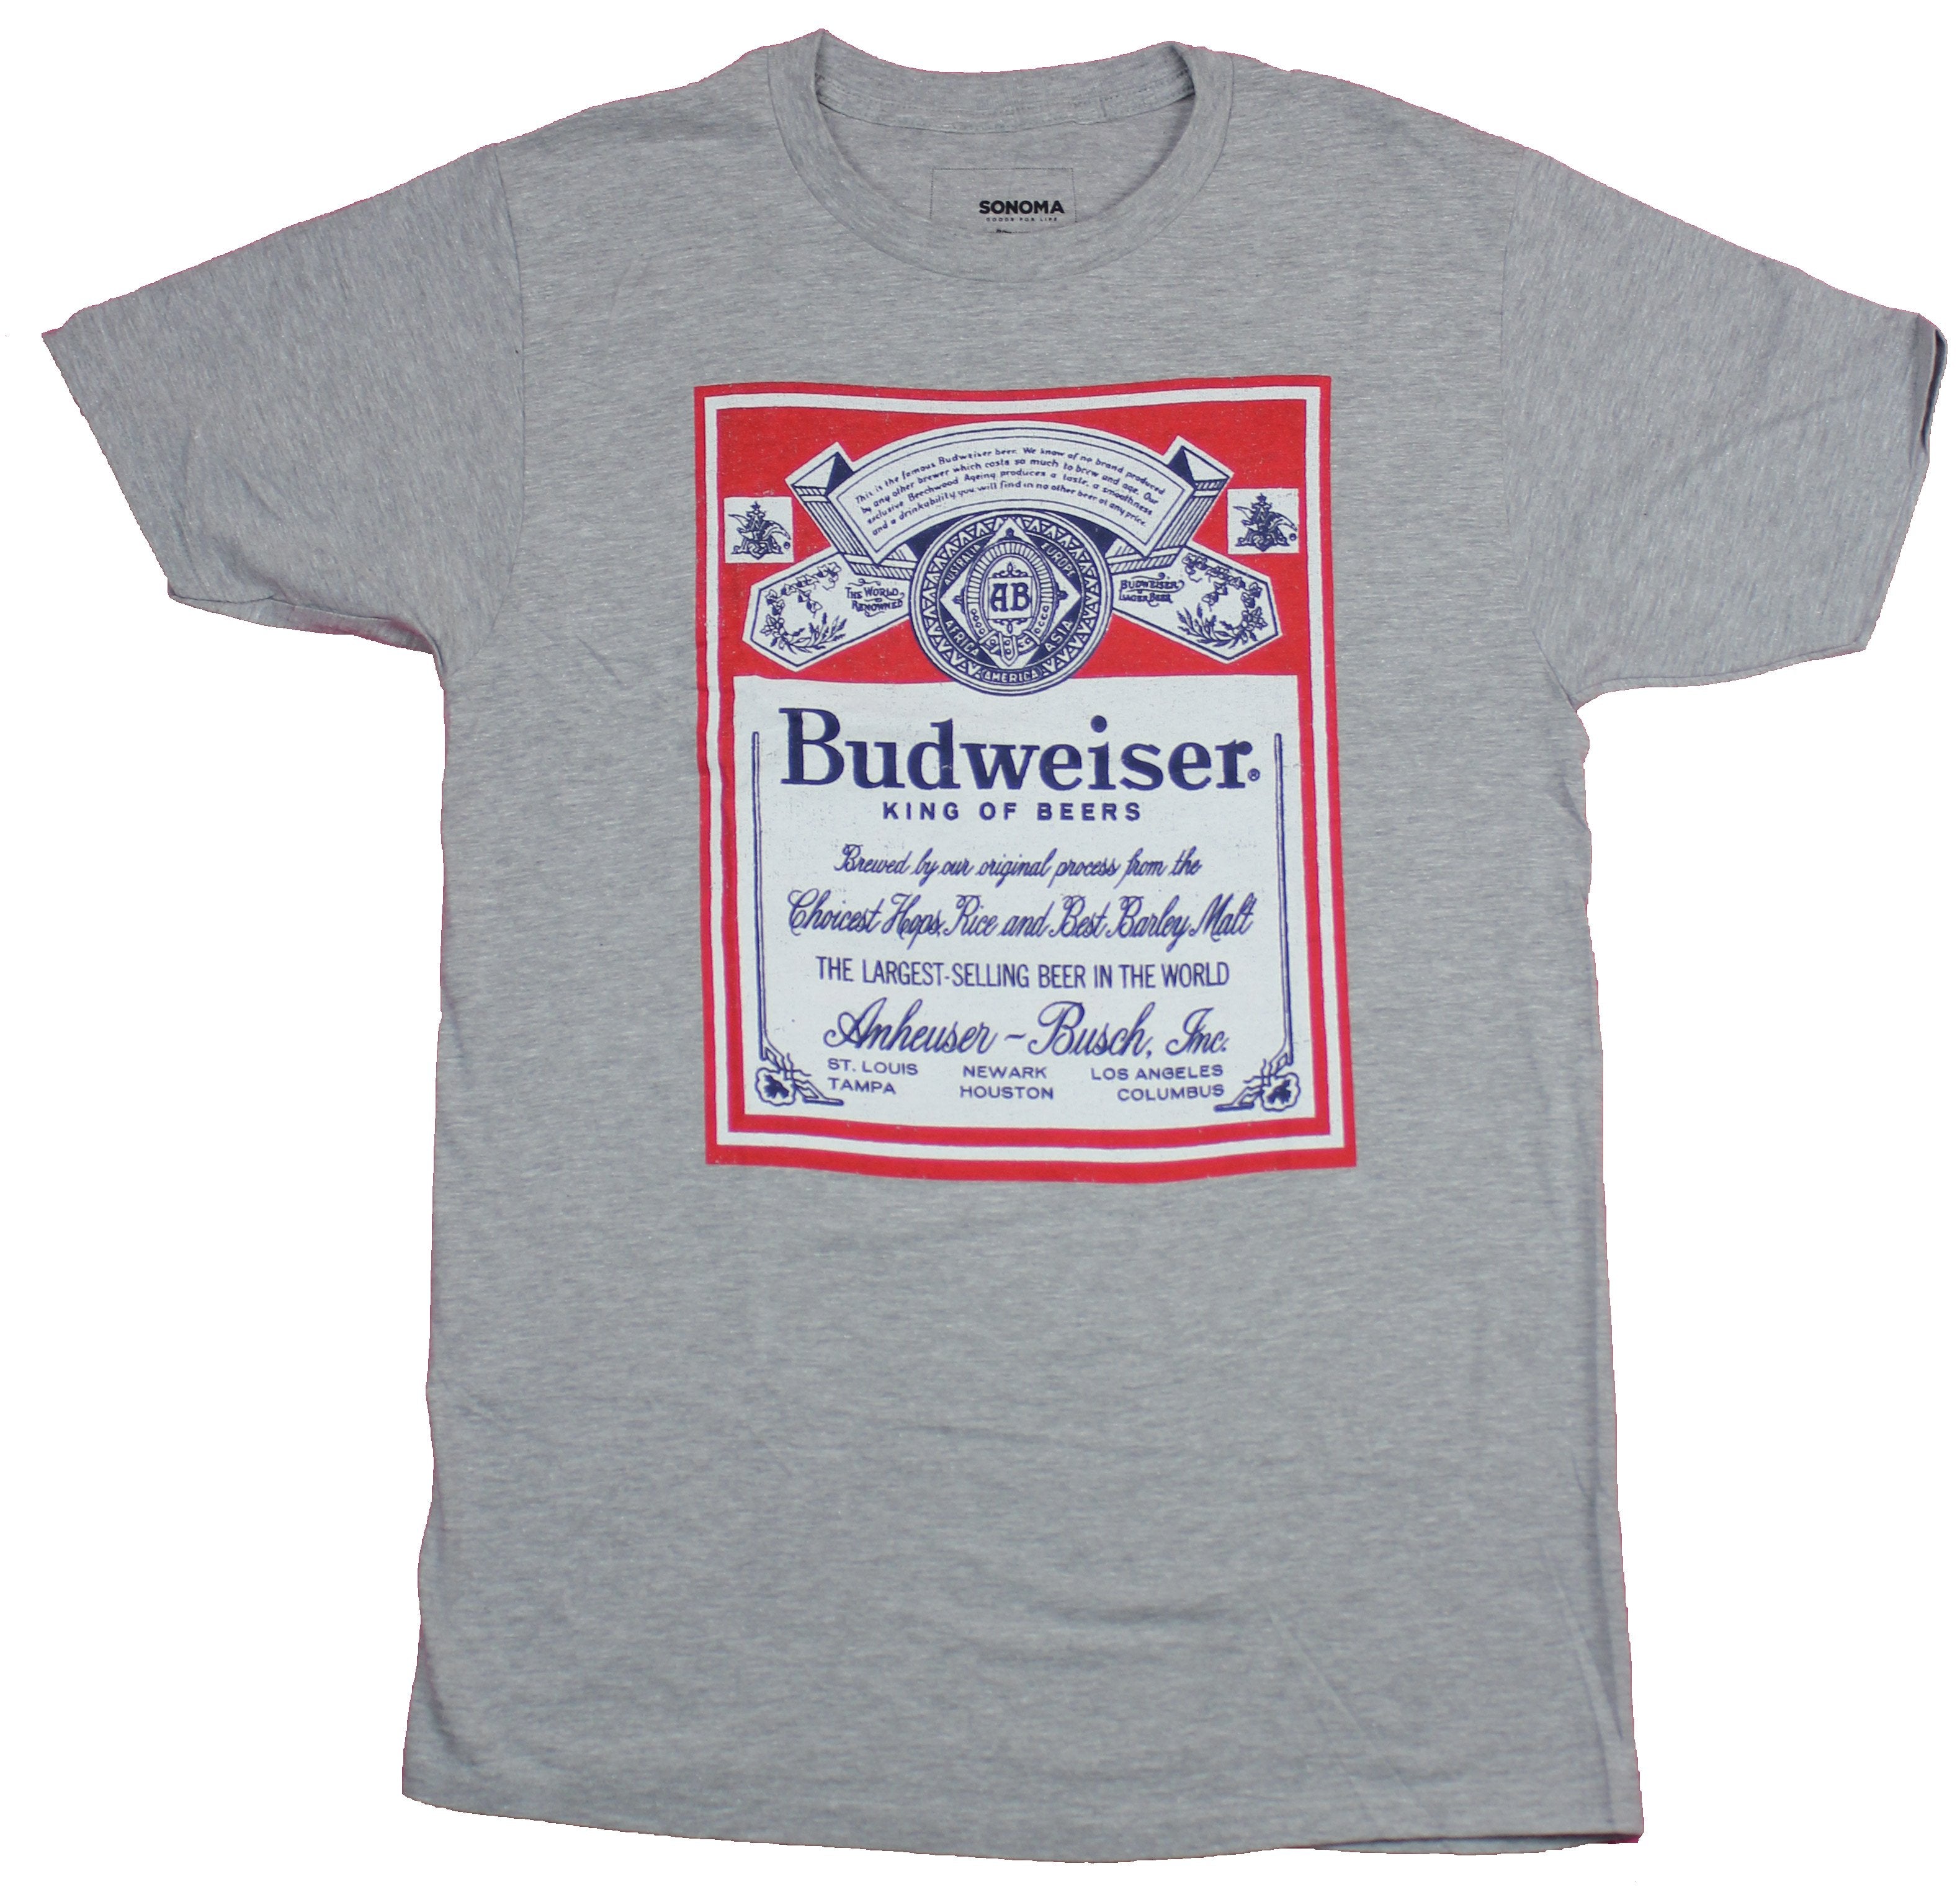 Budweiser Mens T-Shirt  - Classic Red White Blue Label Image